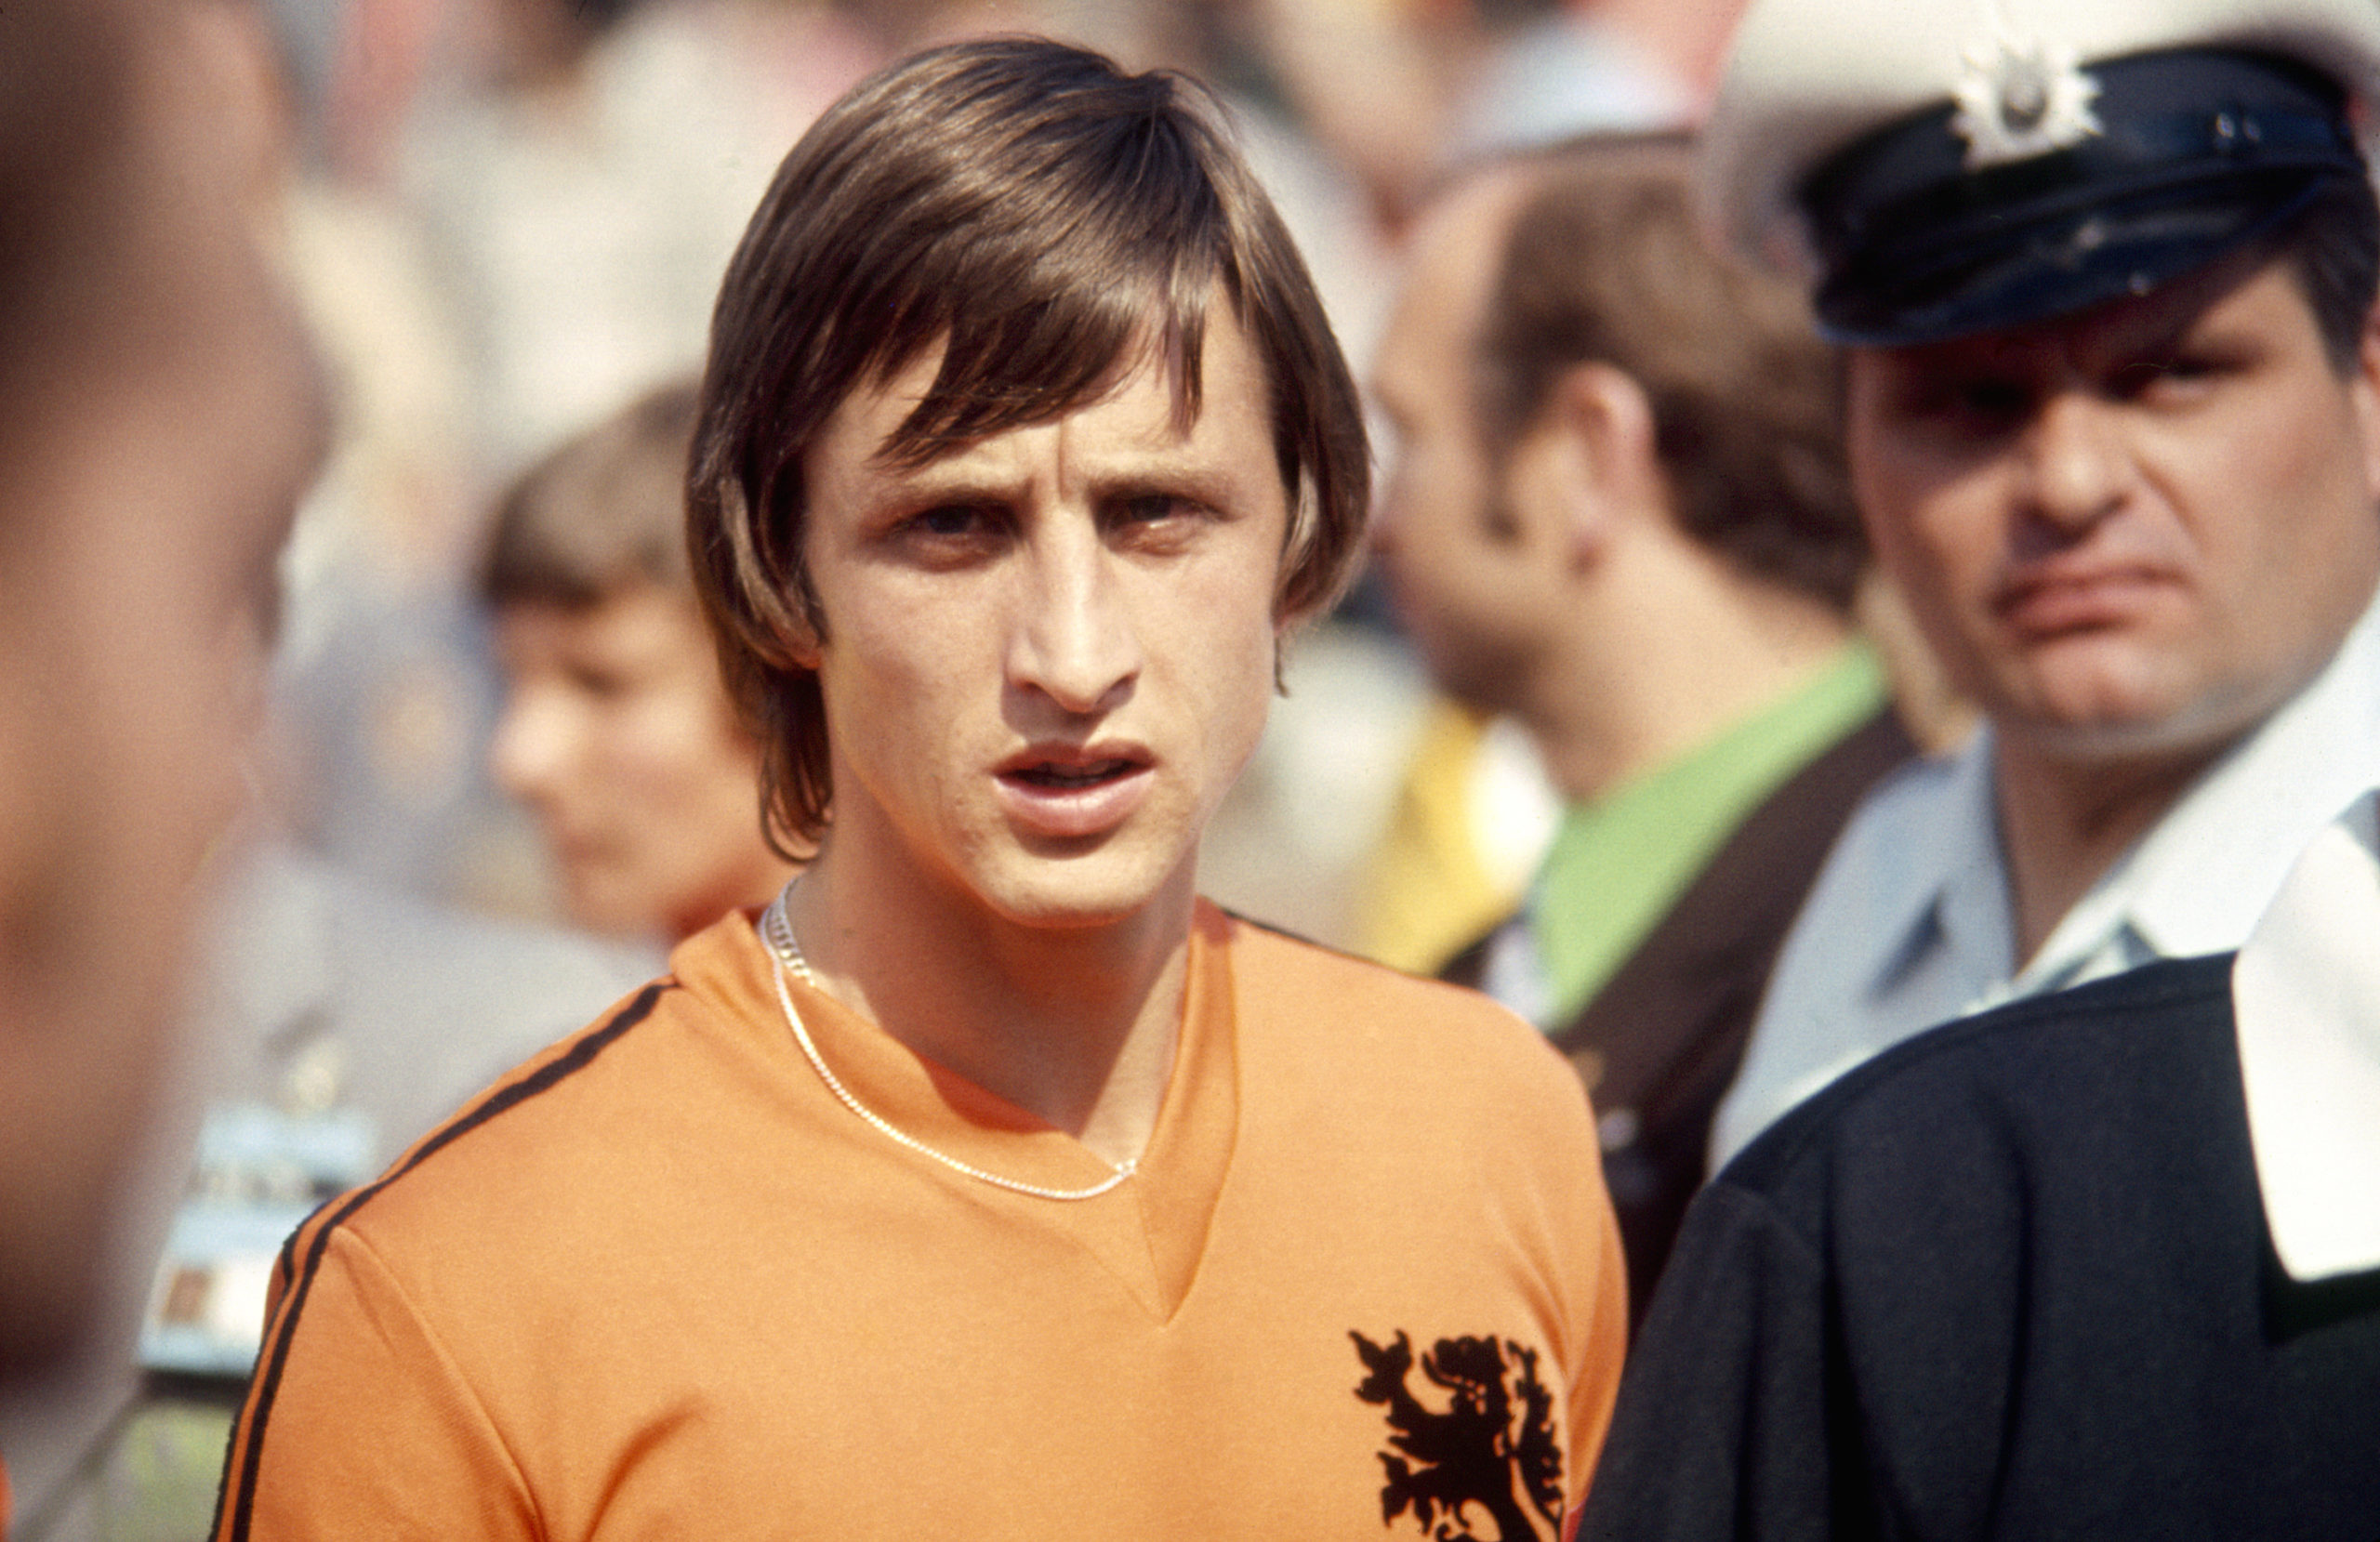 Dutch footballer Johan Cruyff at the World Cup in West Germany in 1974.